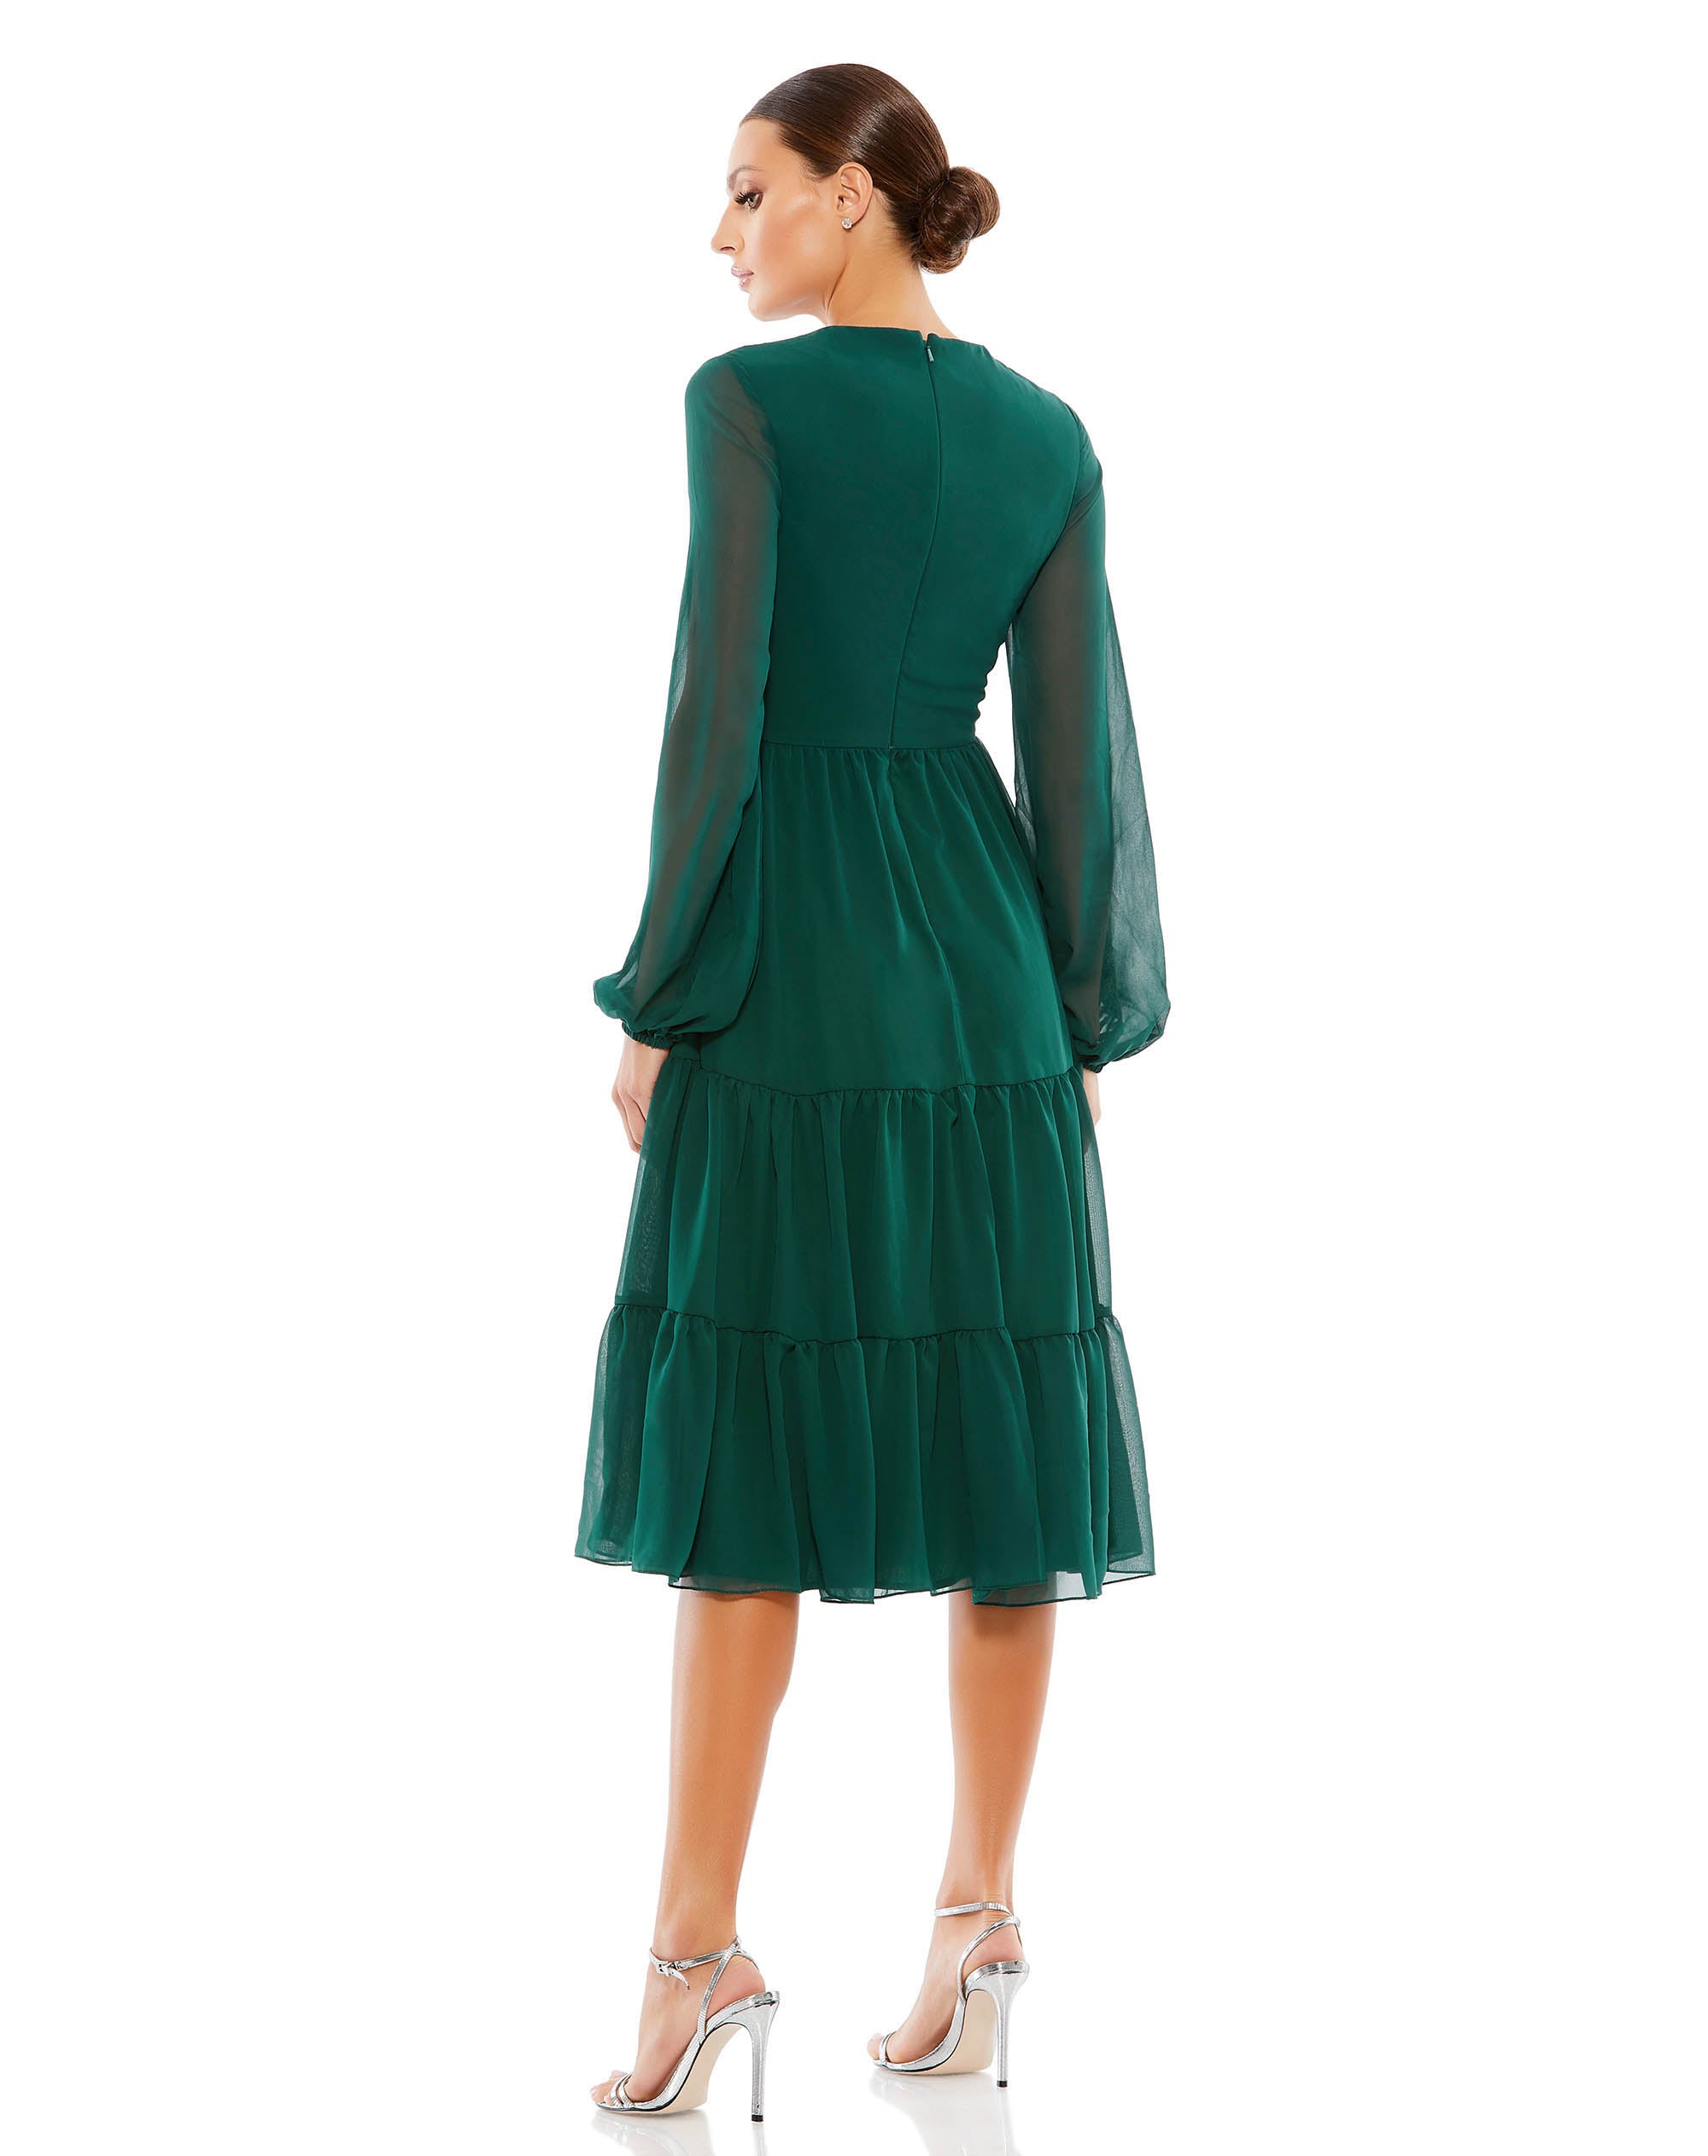 Ruched V-Neck Tiered Midi Dress - FINAL SALE